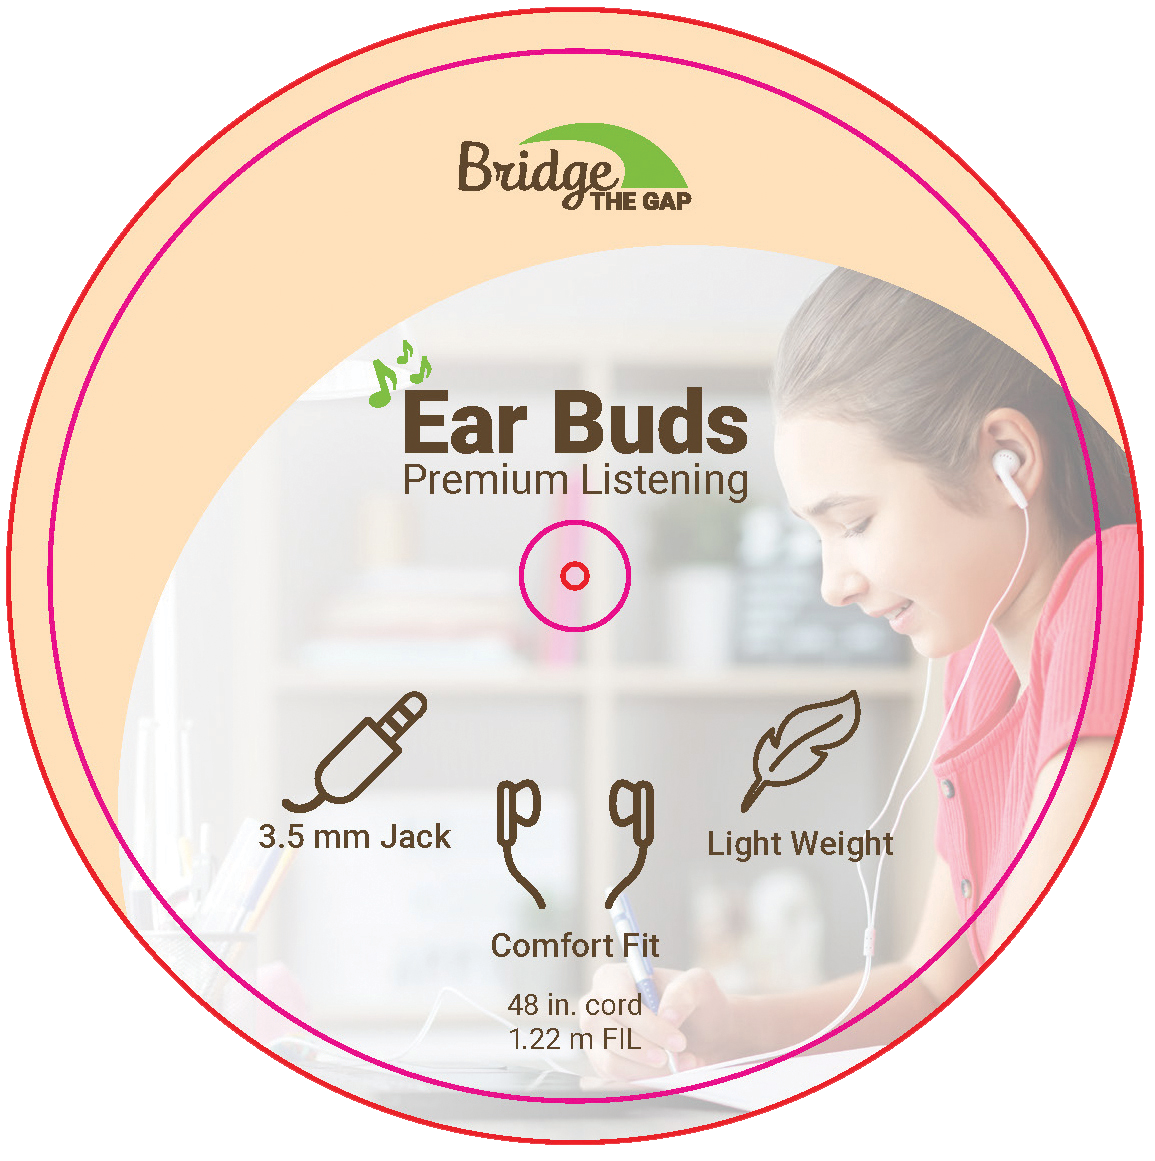 Final Version of the front of the Ear buds packaging Flat design with dieline